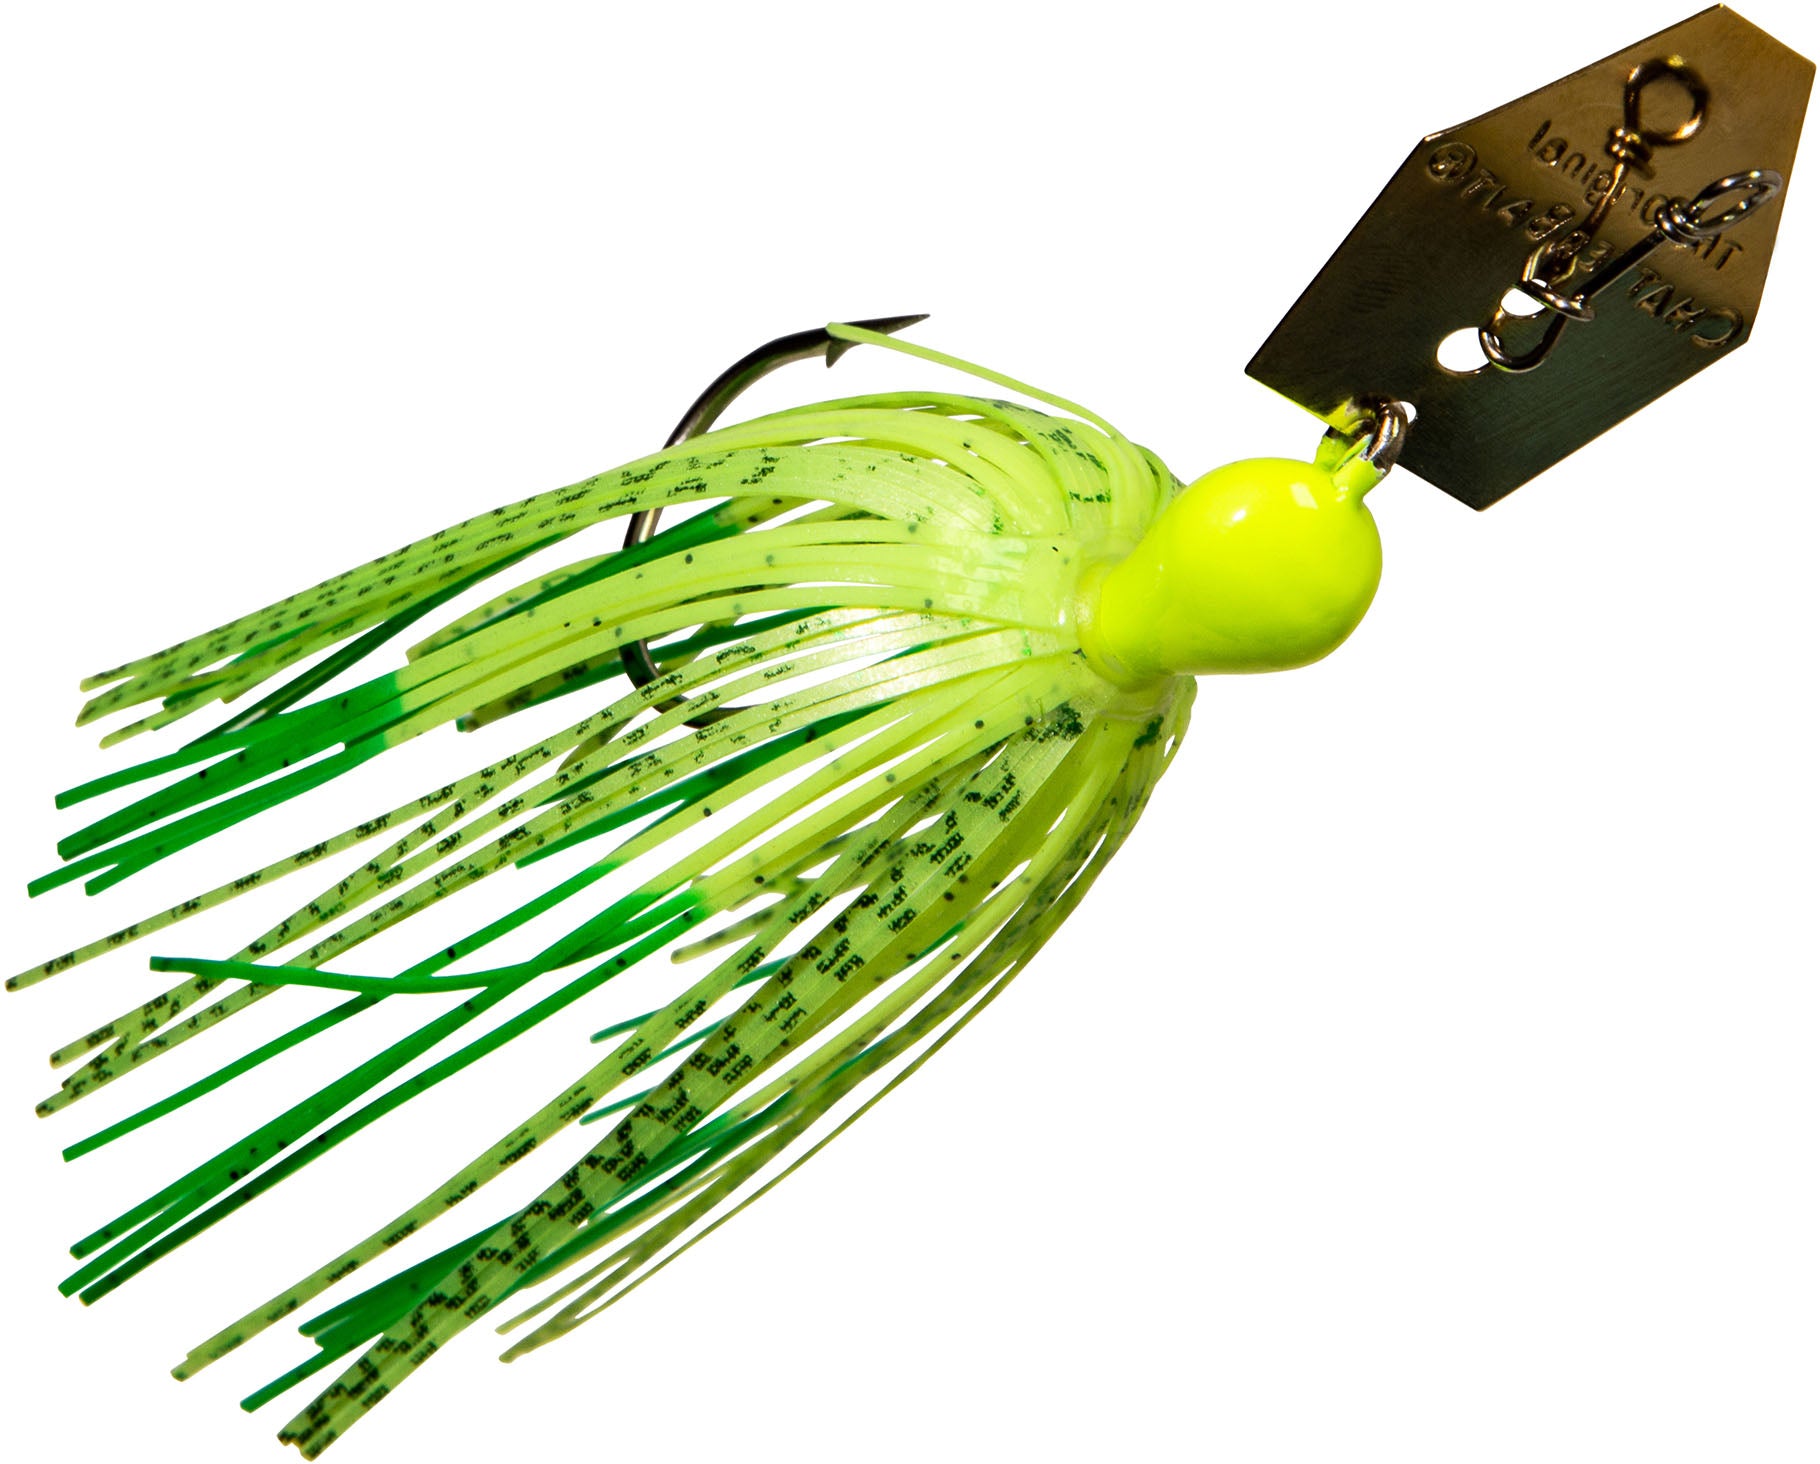 Z-MAN Chatterbait, Chartreuse, 3/8-Ounce, Baitcasting Reels